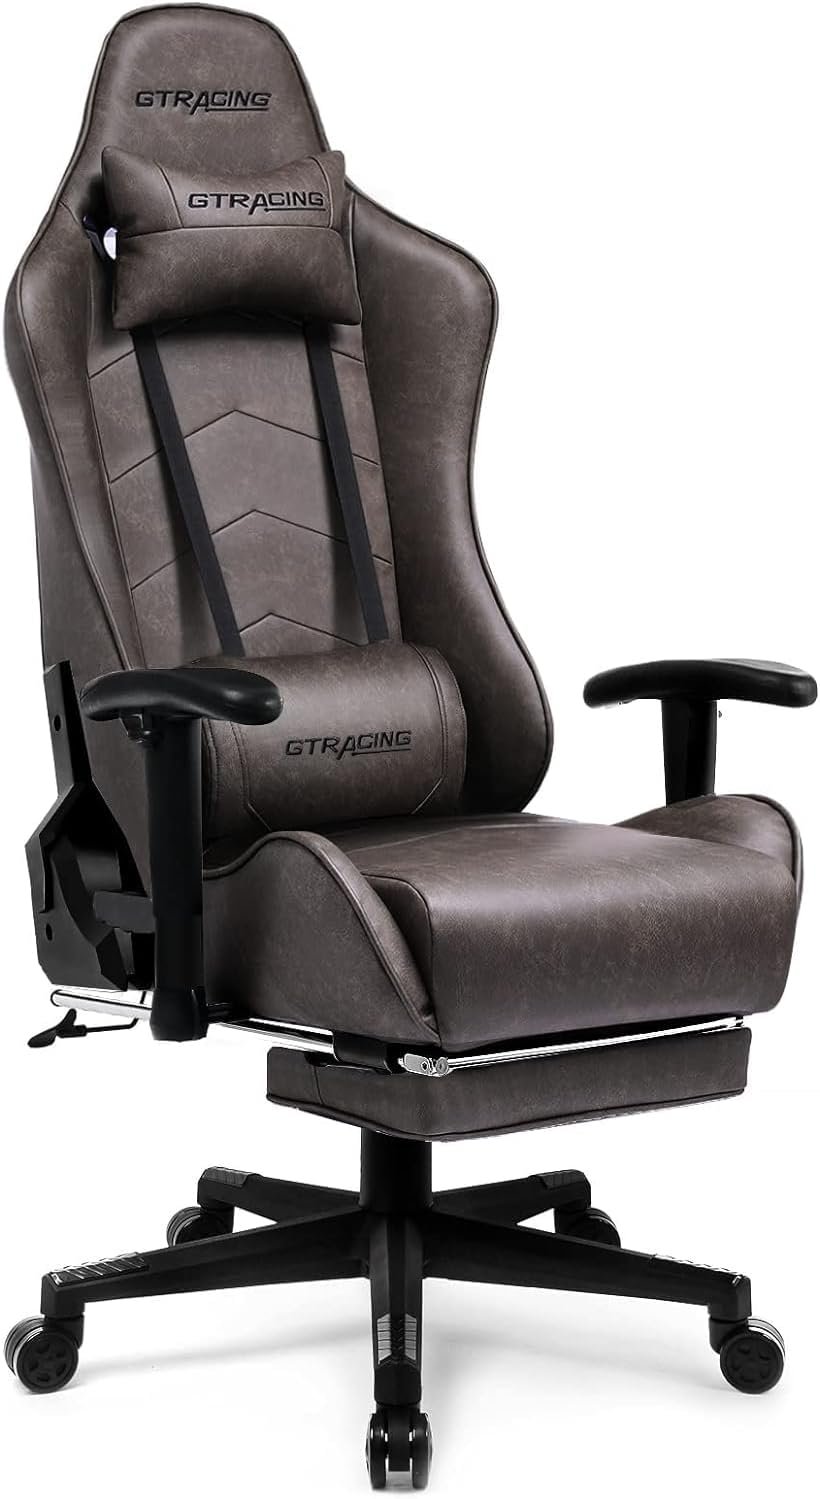 GTRACING Gaming Chair with Footrest Review